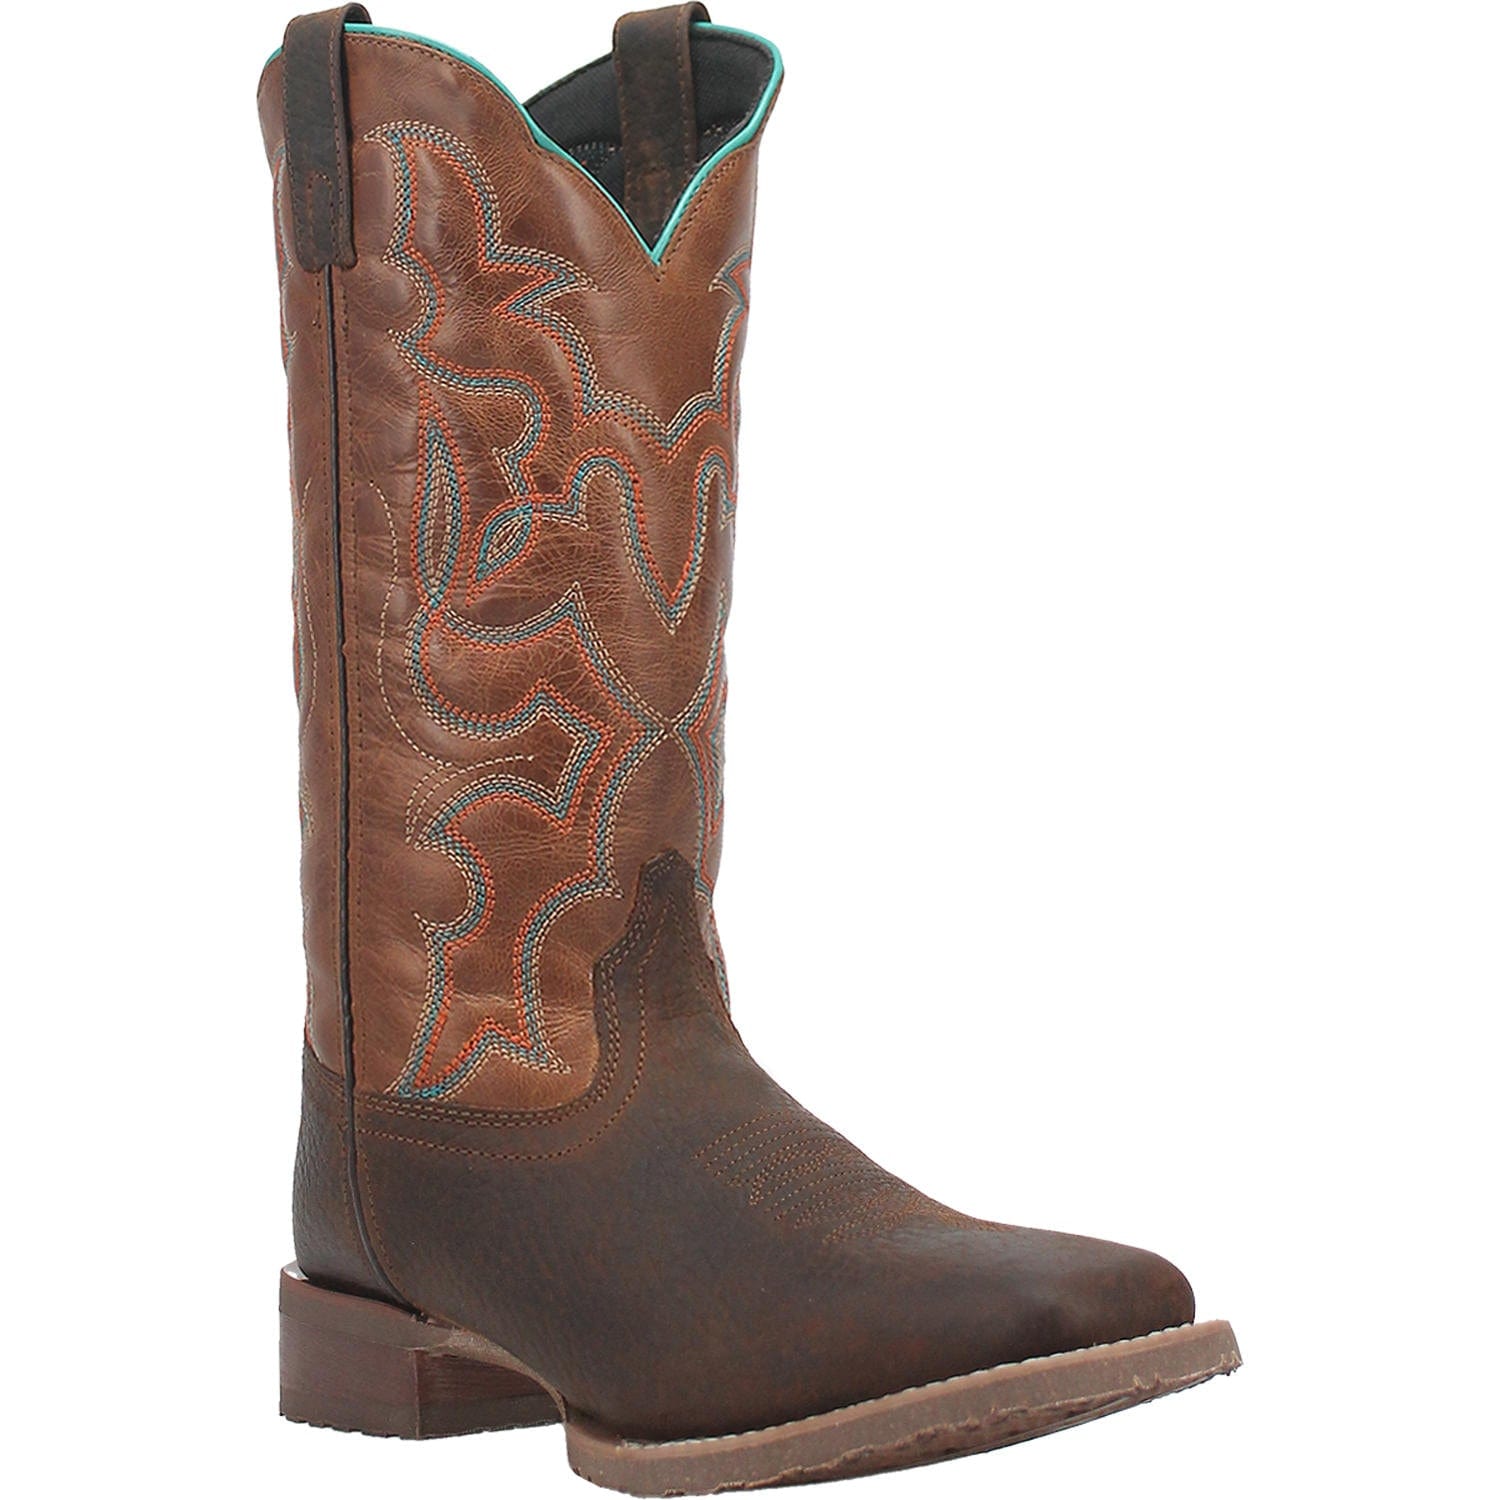 LAREDO Boots Laredo Men's Odie Brown/Tan Leather Cowboy Boots 7961